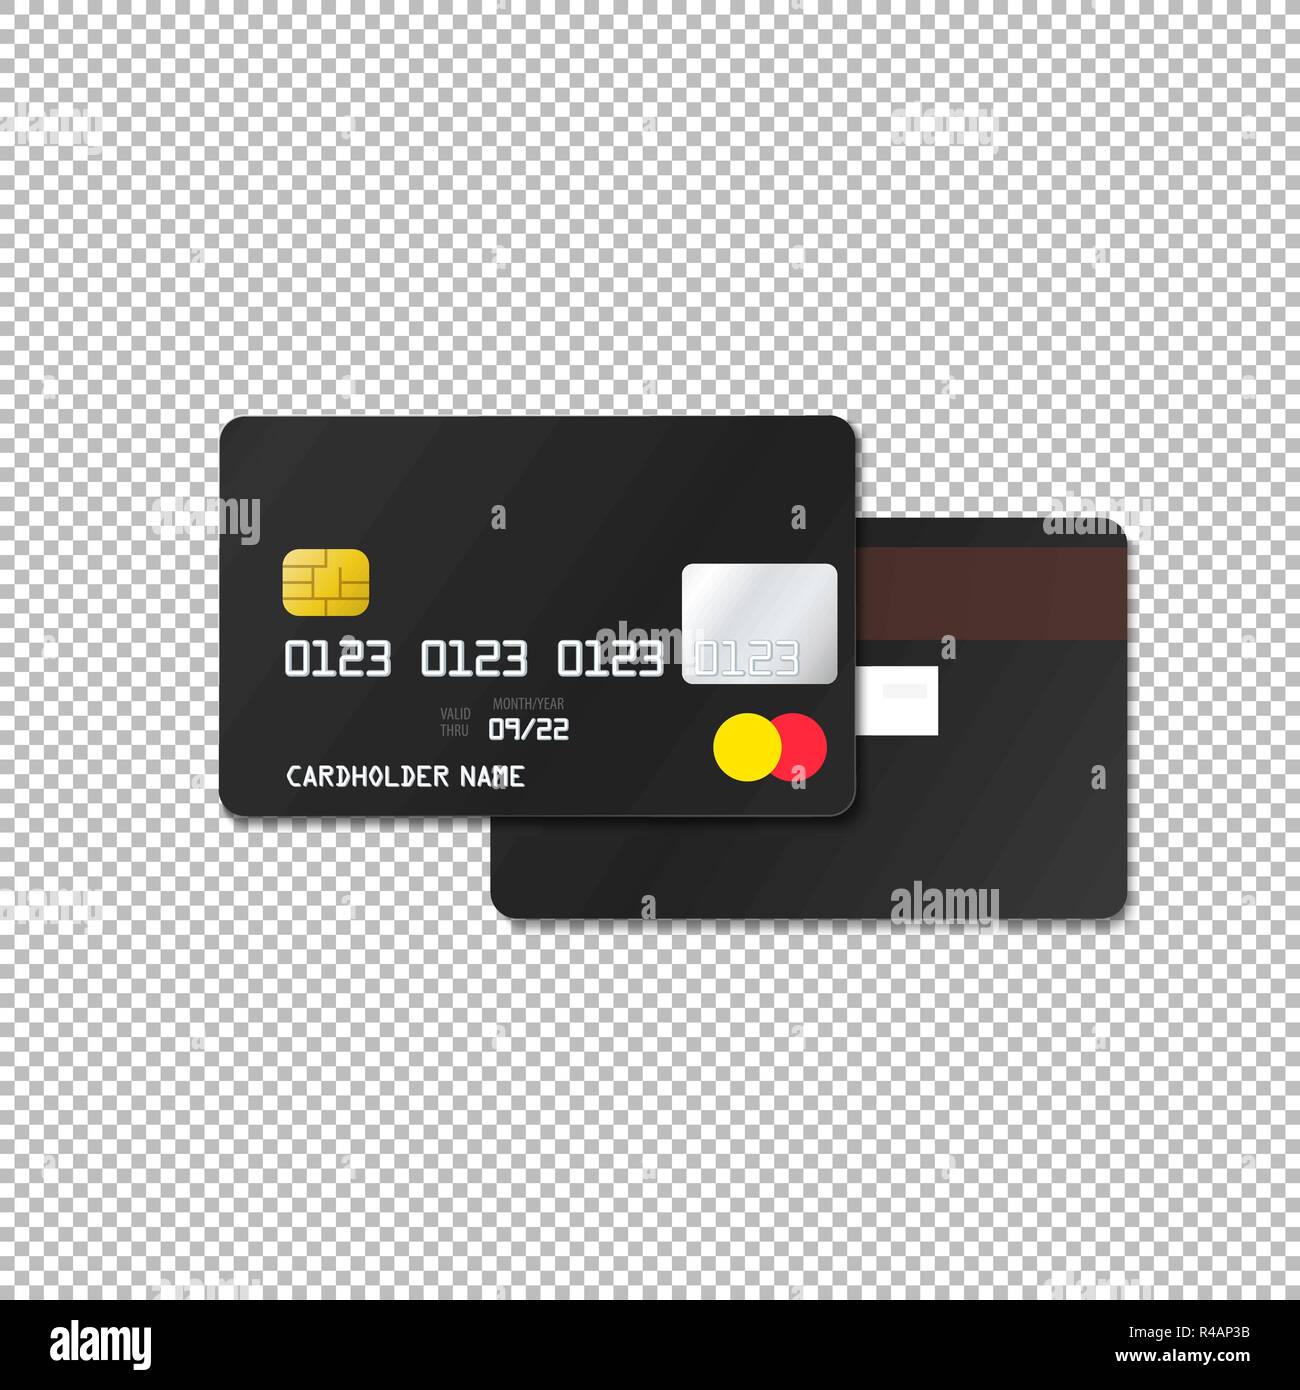 vector mock up black blank plastic bank card face and back sides illustration realistic with shadow template design isolated on transparent background Stock Vector